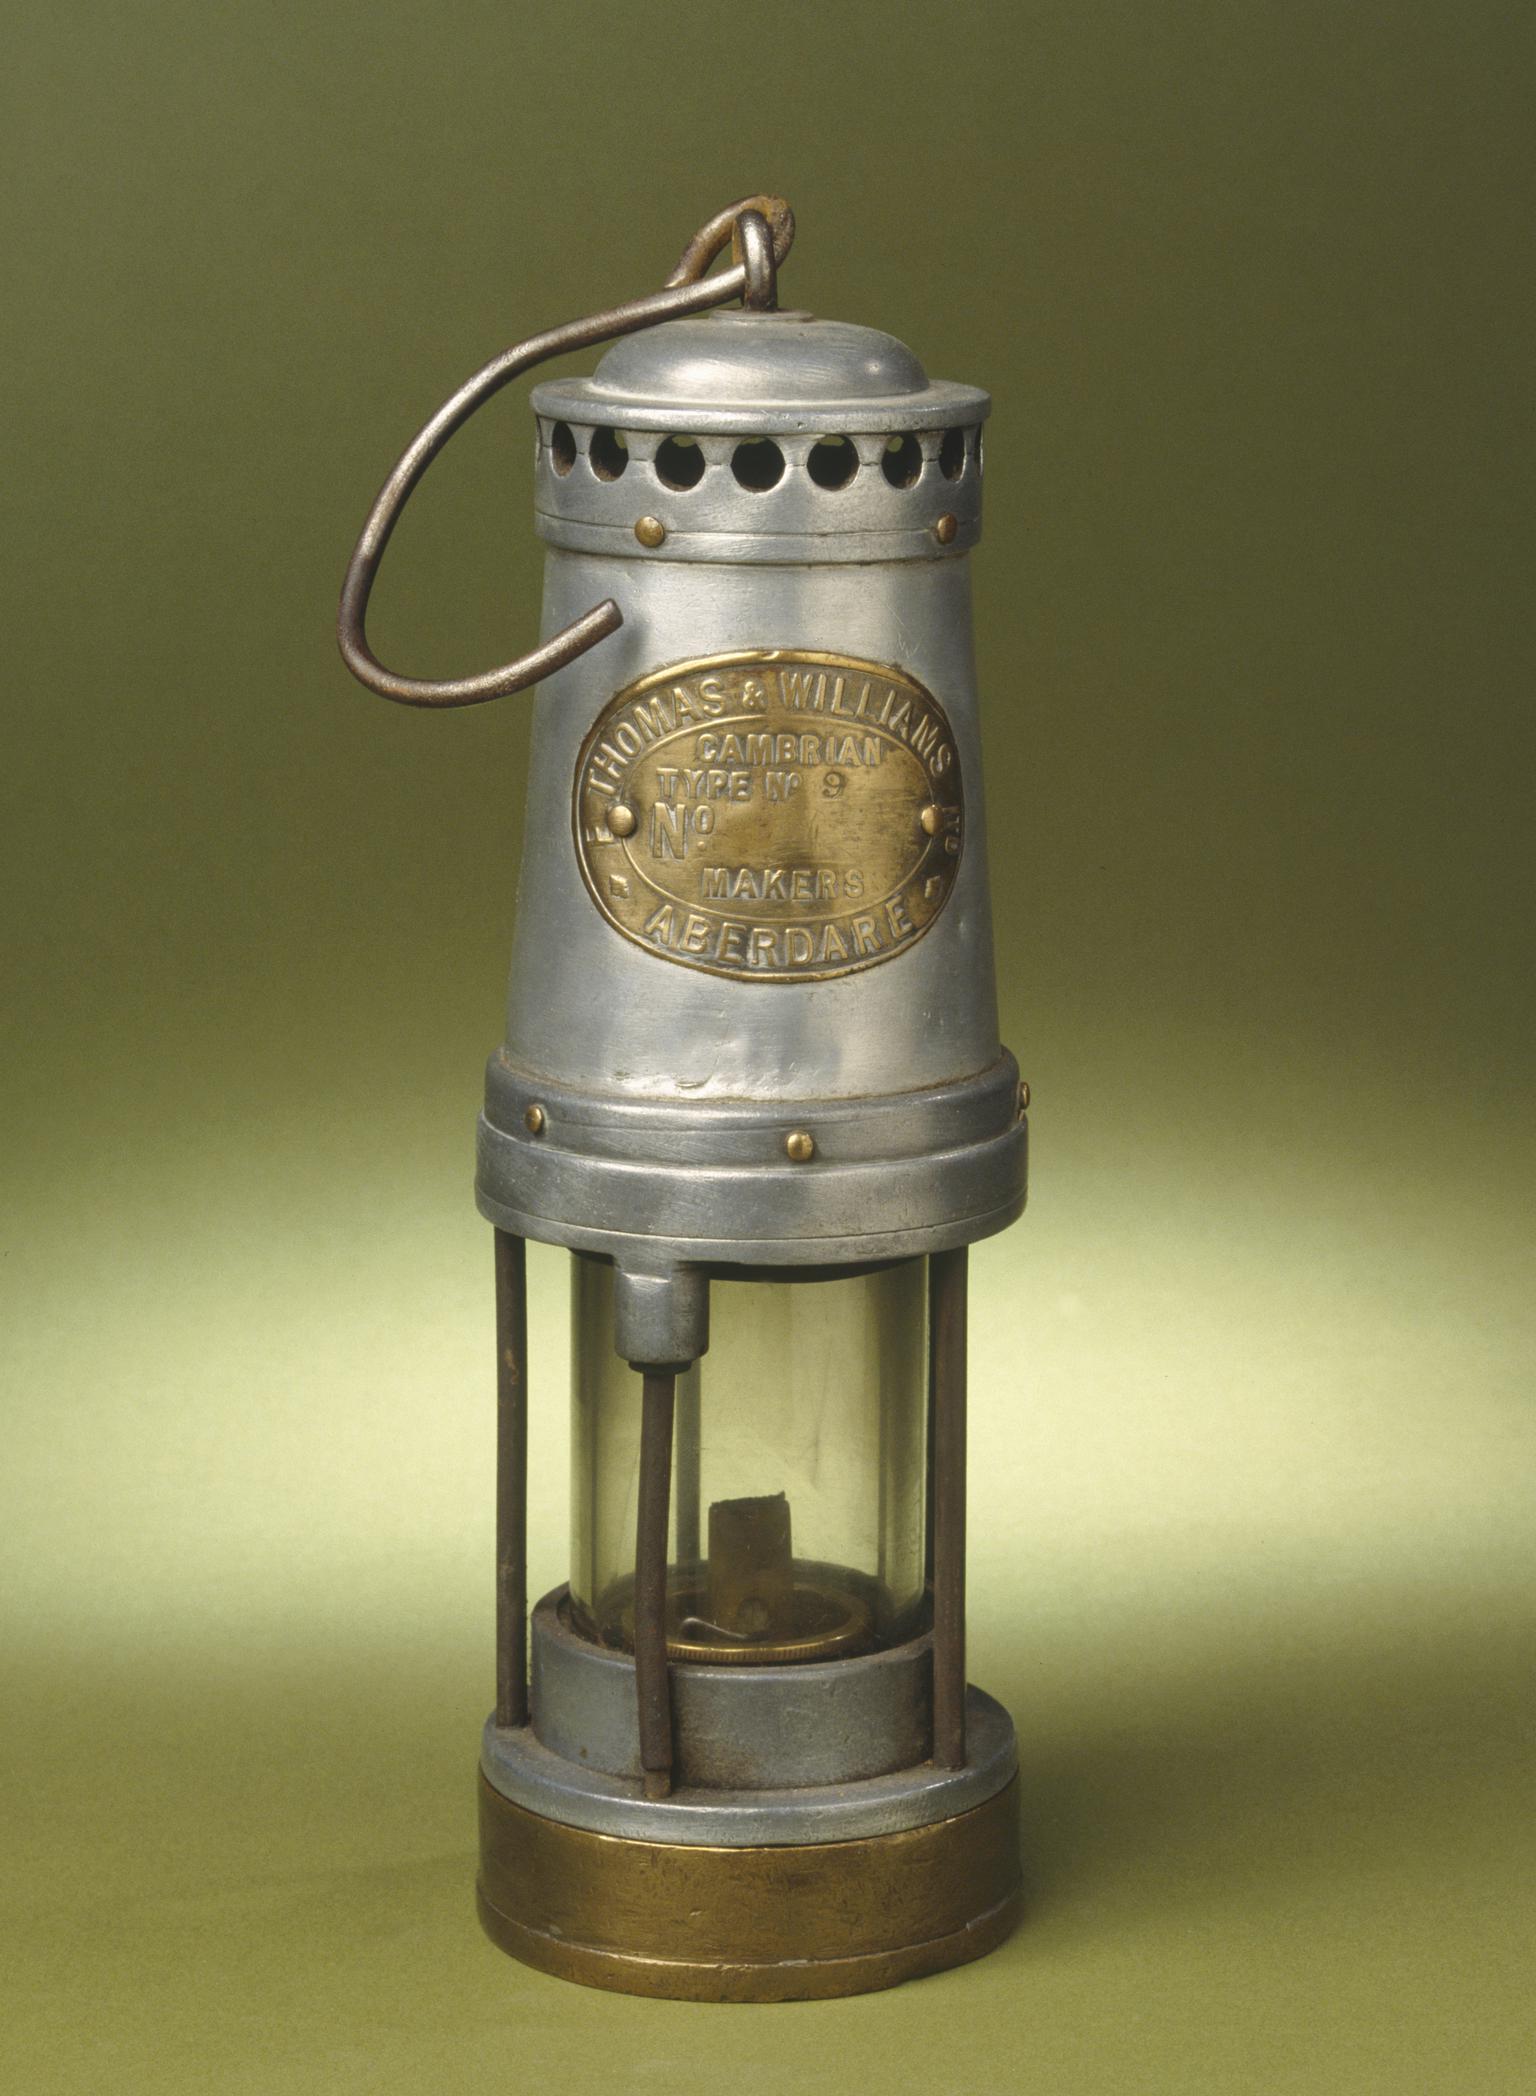 Cambrian No 9 flame safety lamp